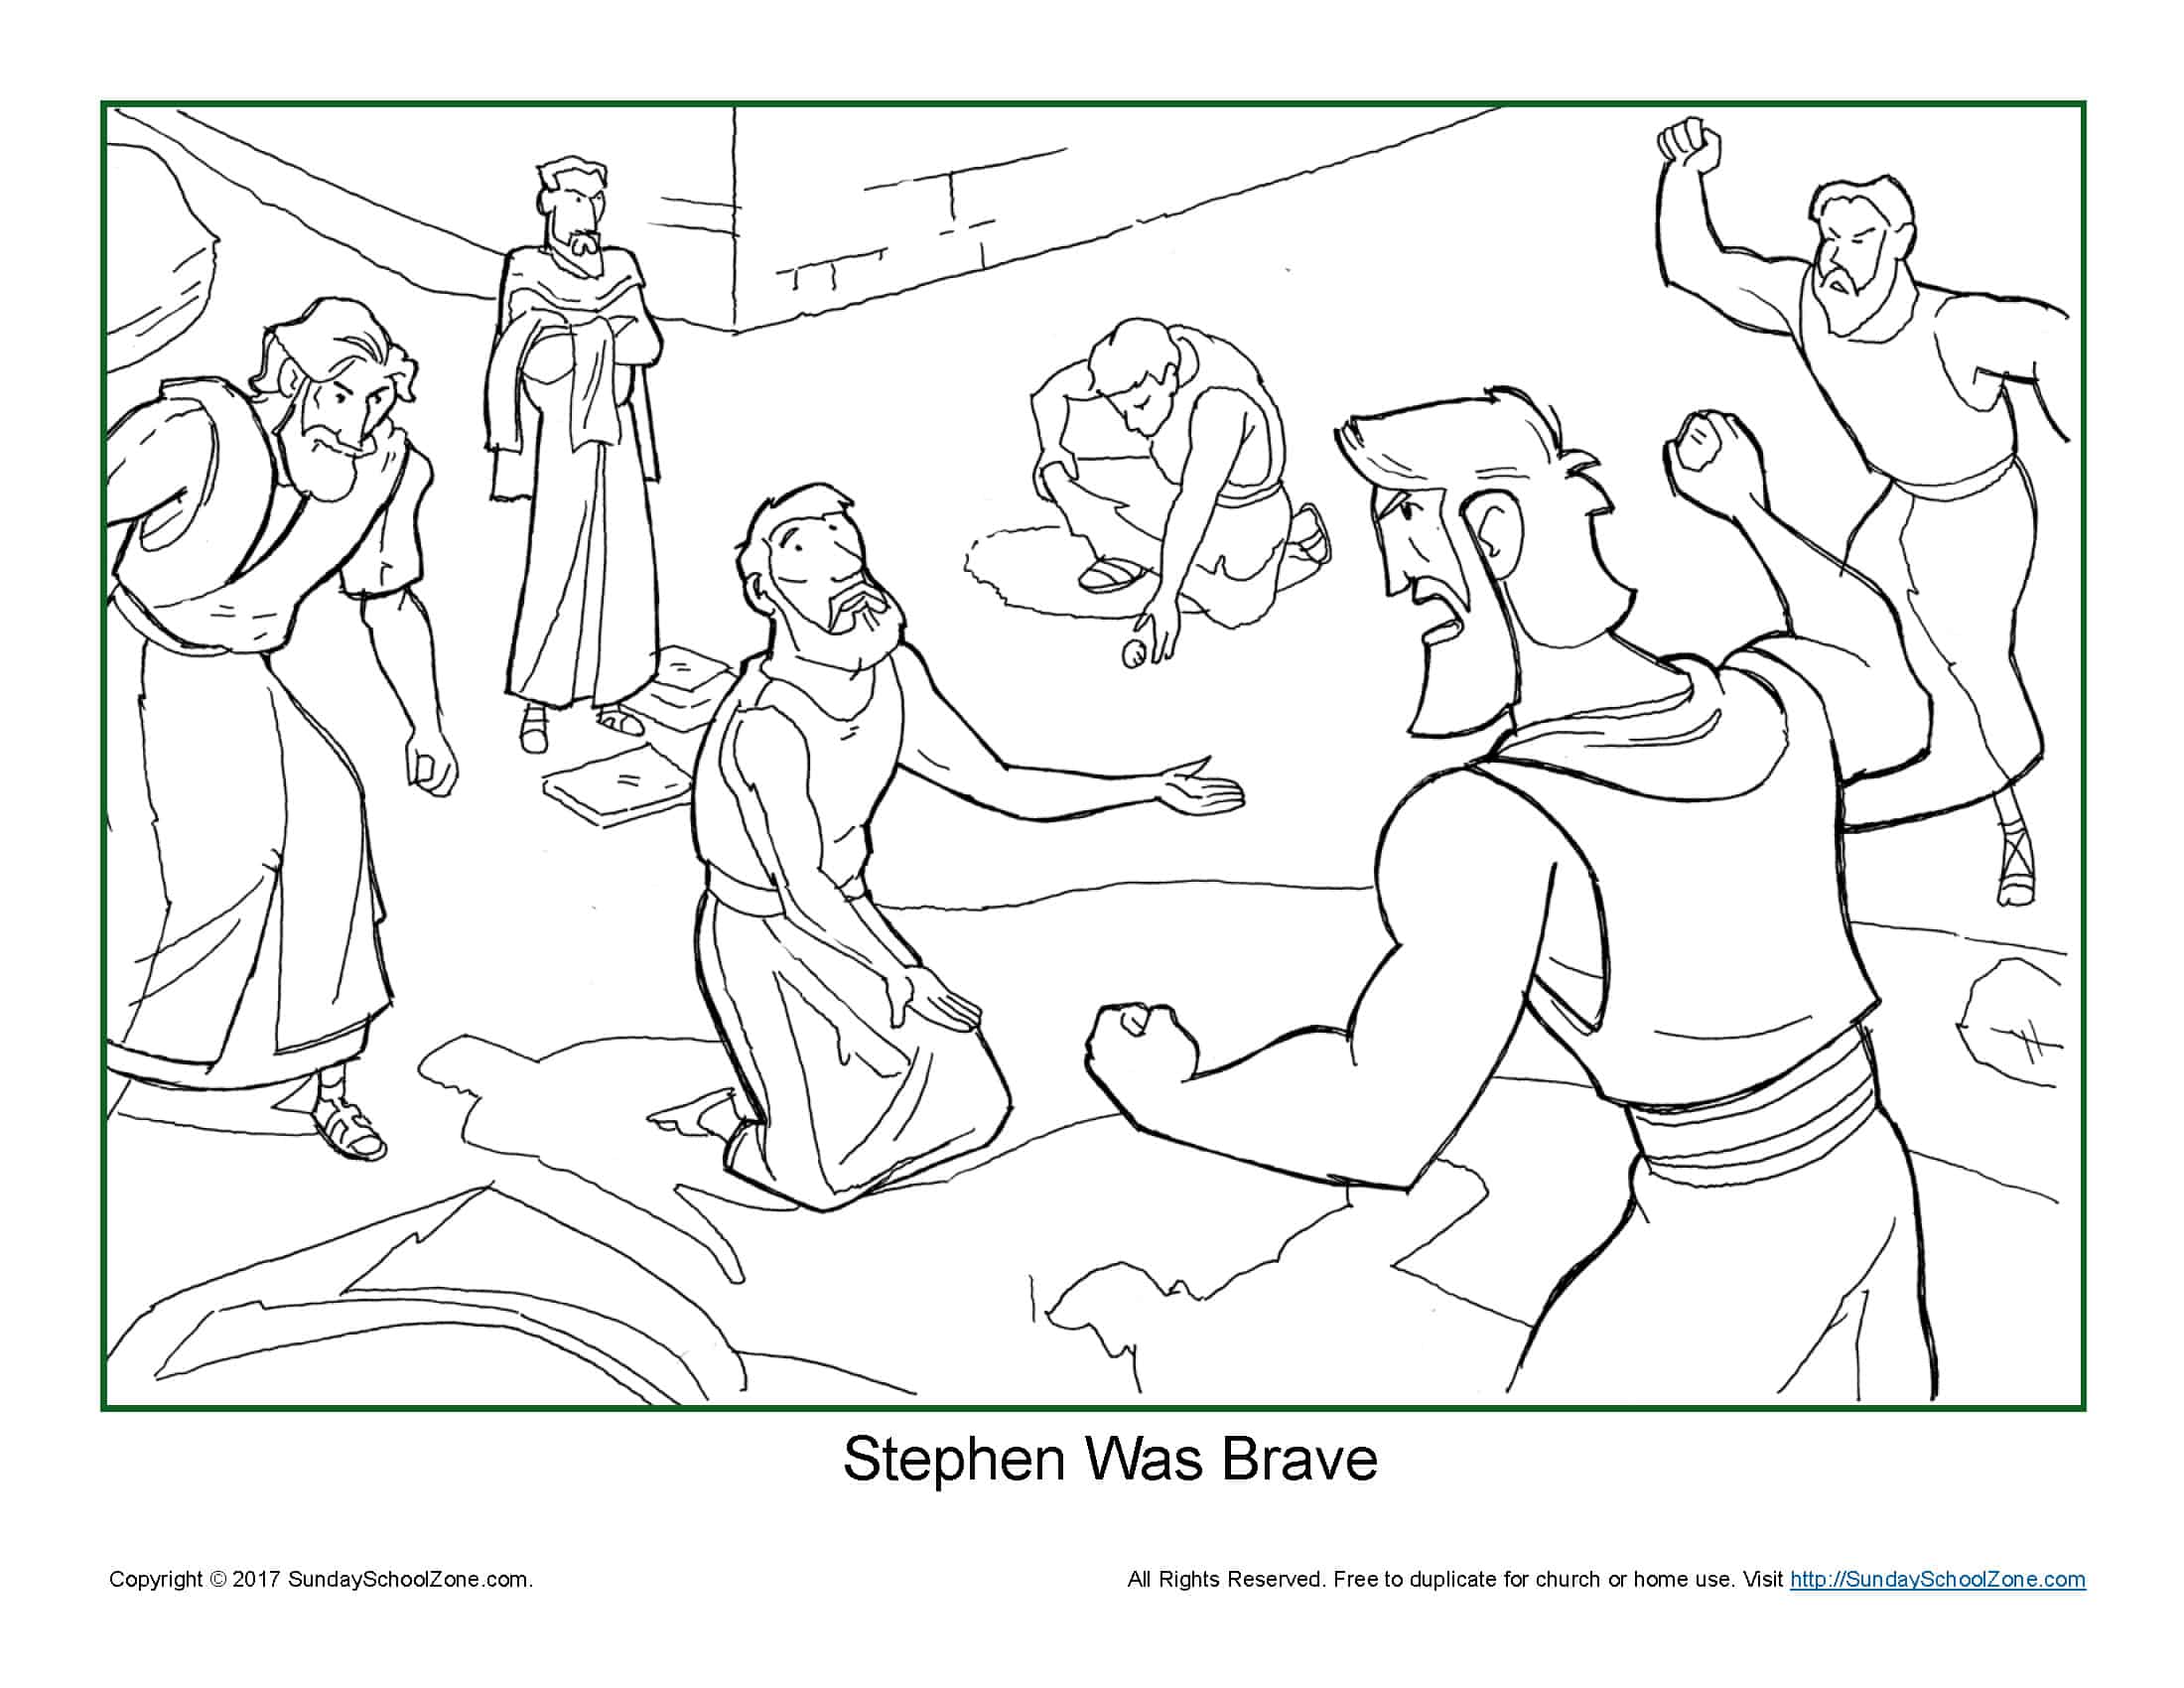 stephen-was-brave-coloring-page-on-sunday-school-zone